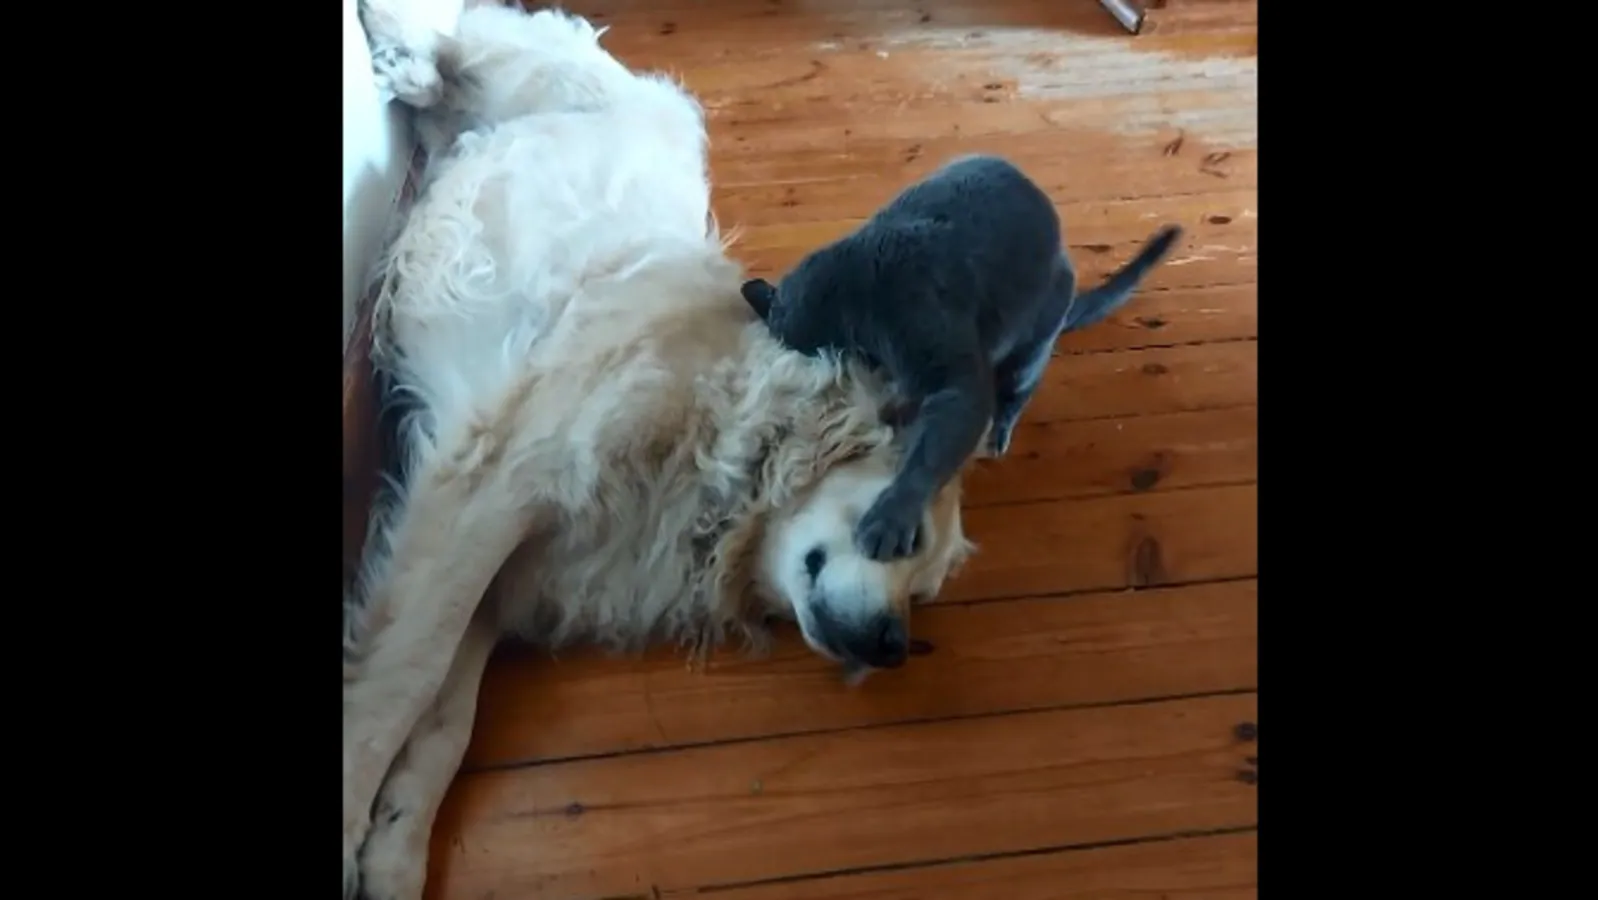 Cat grows up thinking it is a dog. Watch how it interacts with another pooch